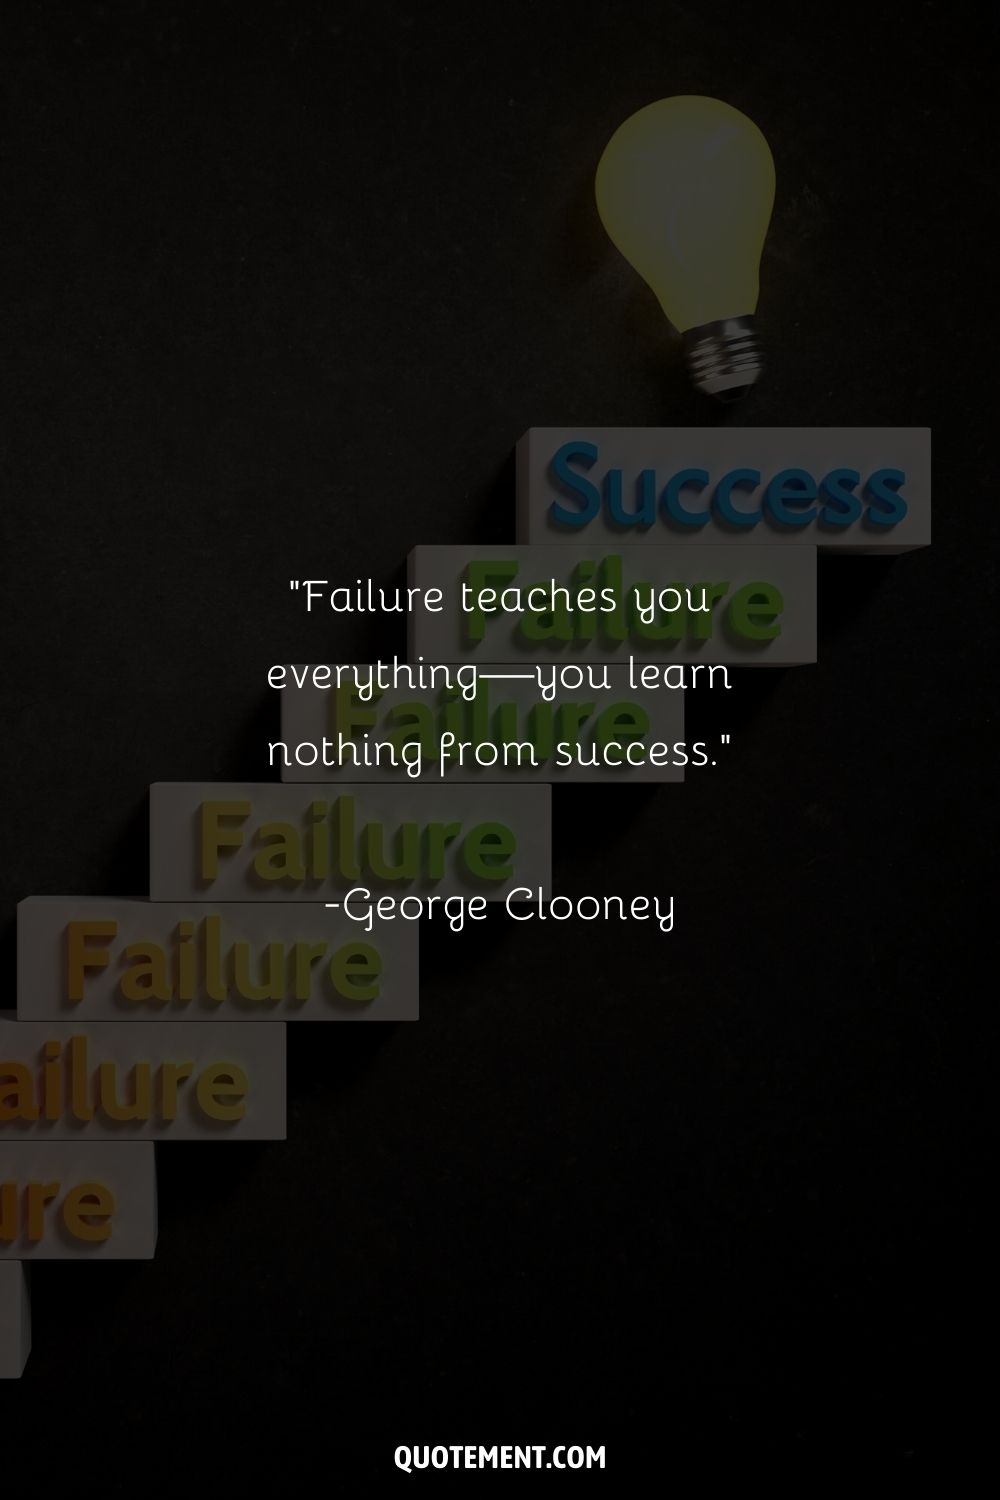 “Failure teaches you everything—you learn nothing from success.” ― George Clooney